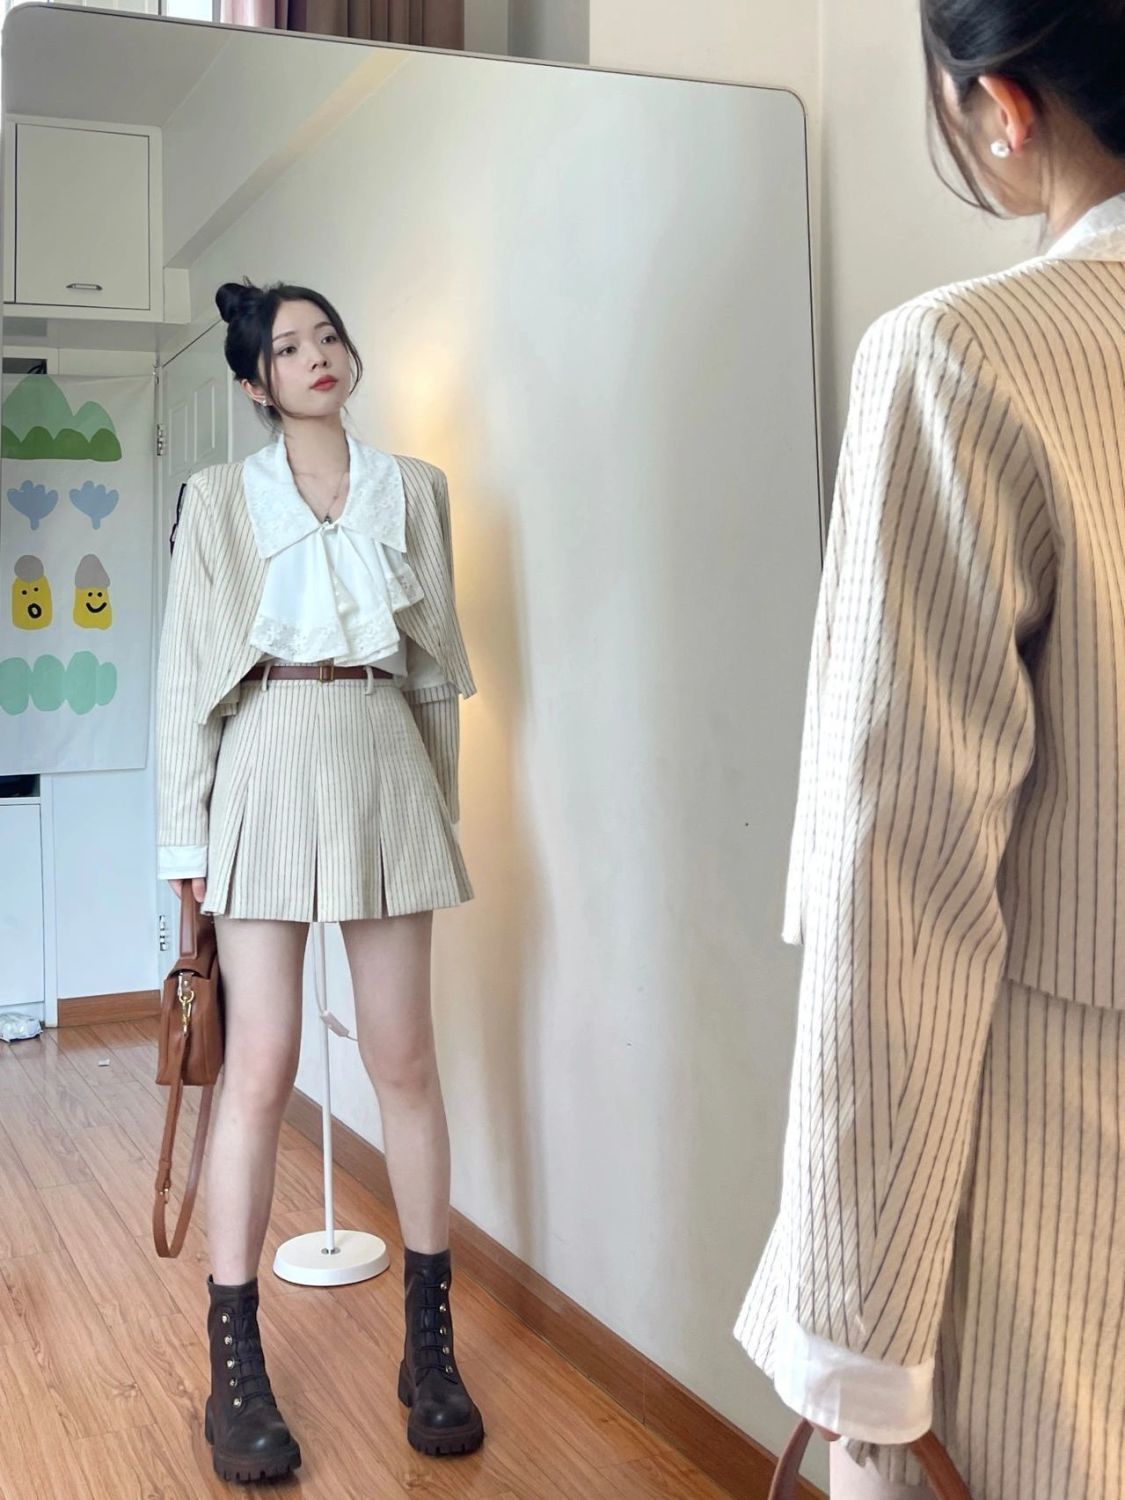 Three-piece suit light luxury style spring and autumn high-quality striped small suit jacket wearing a large lapel shirt skirt